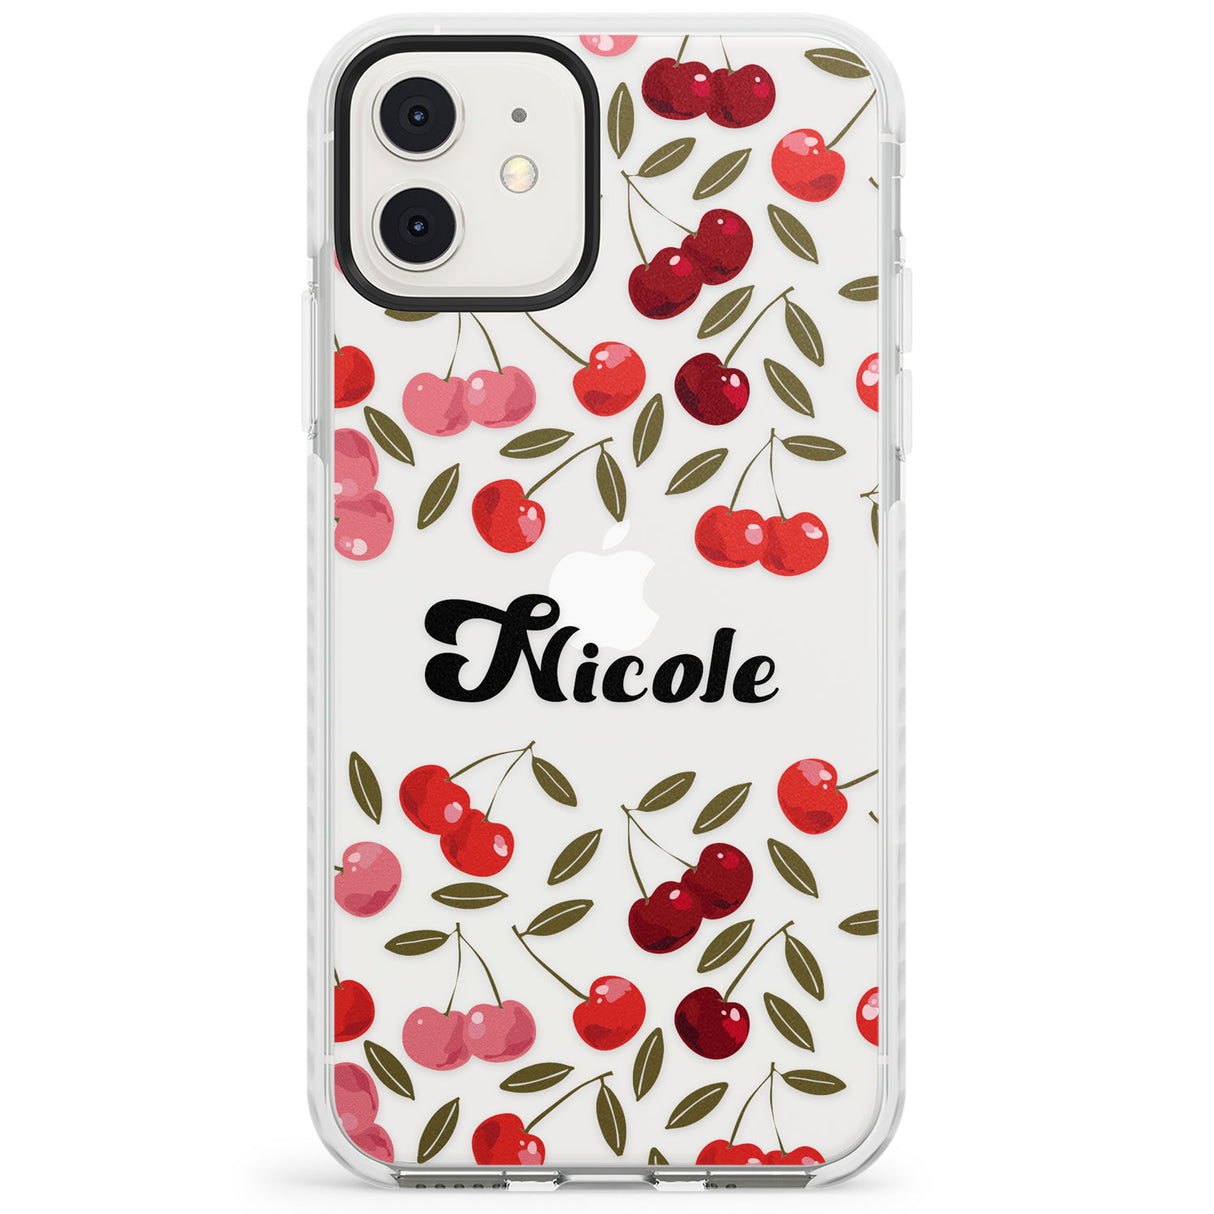 Personalised Cherry Pattern Impact Phone Case for iPhone 11, iphone 12